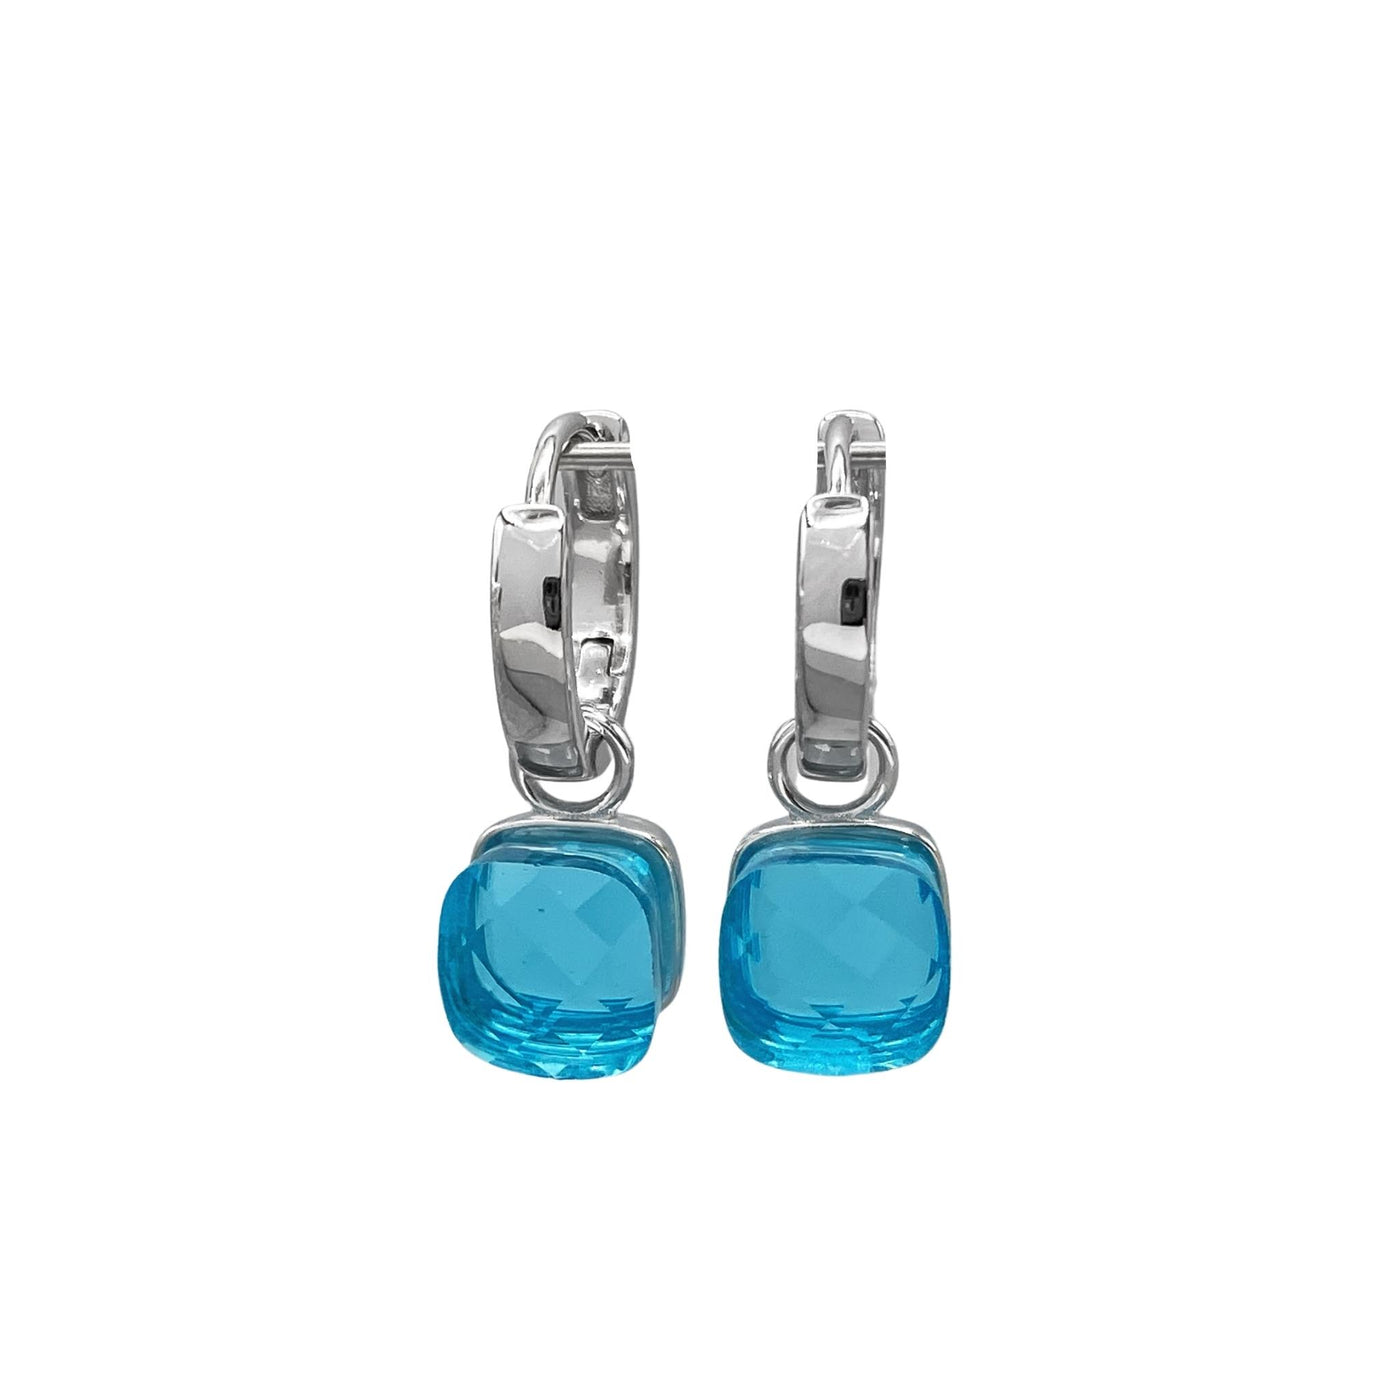 Silver earrings with square stone charm